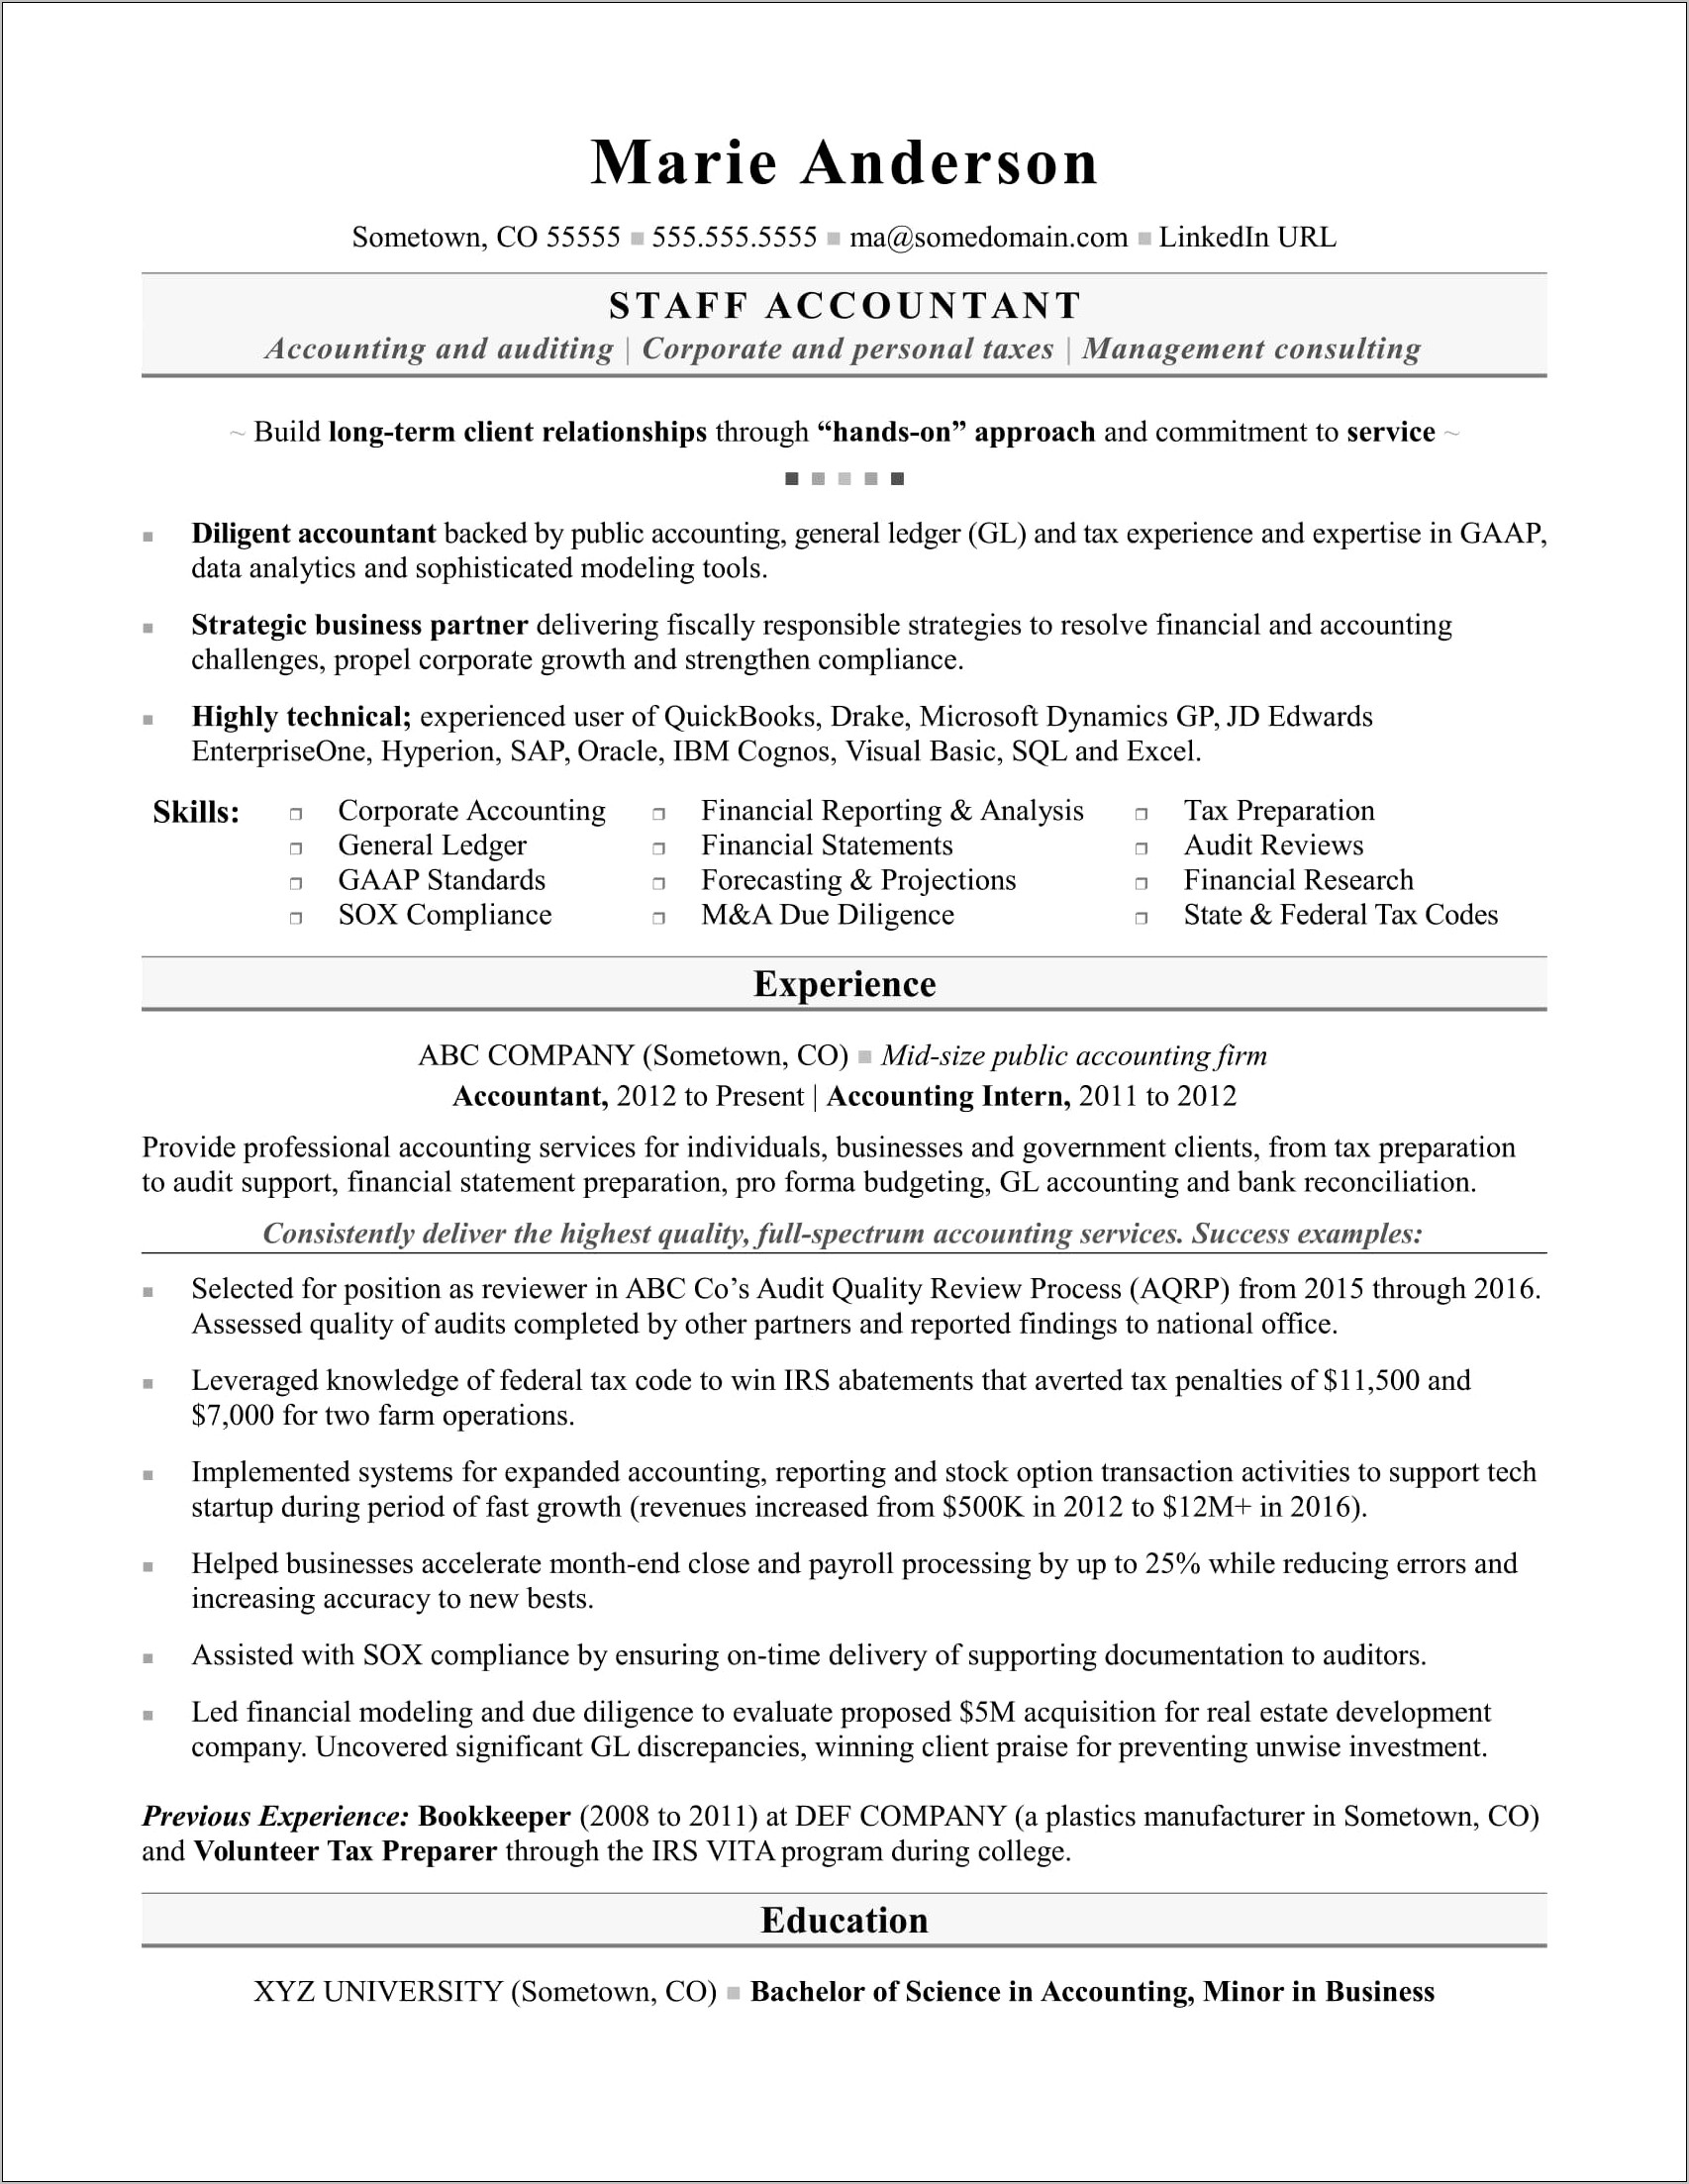 Resume Objective For Quality Auditor